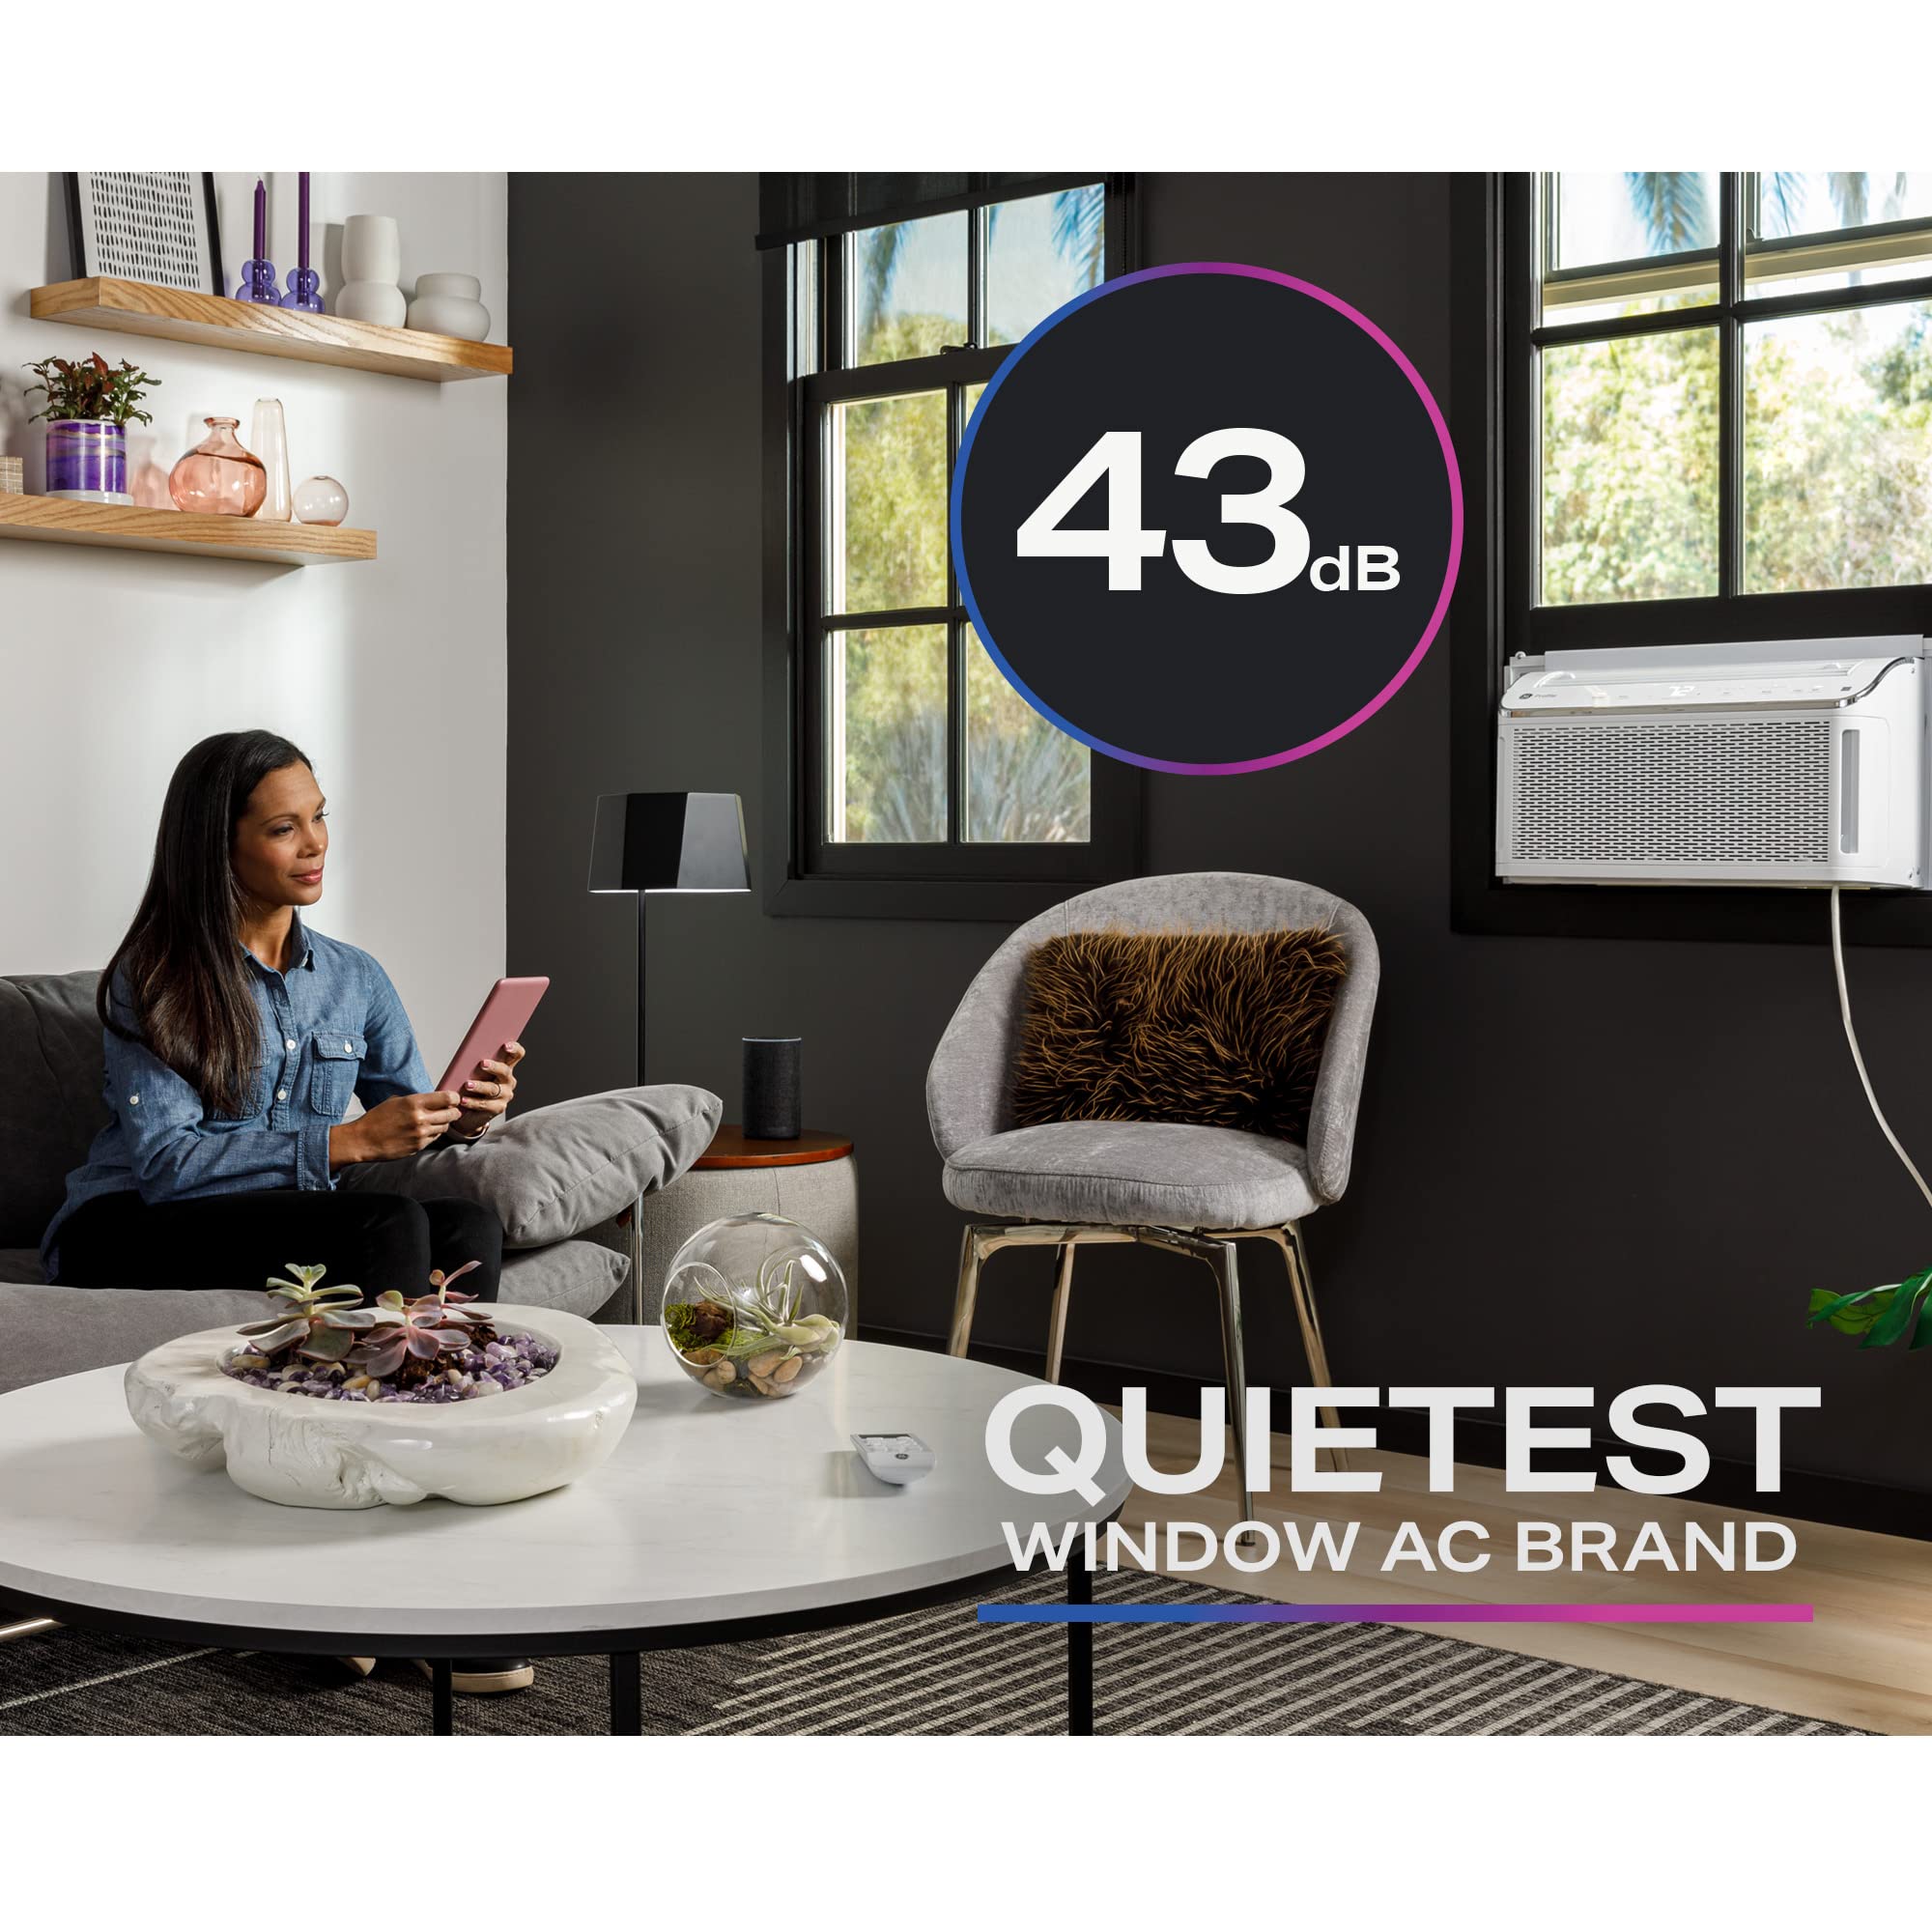 GE Profile Ultra Quiet Window Air Conditioner 8,200 BTU, WiFi Enabled, Ideal for Medium Rooms, Easy Installation with Included Kit, White - image 5 of 6